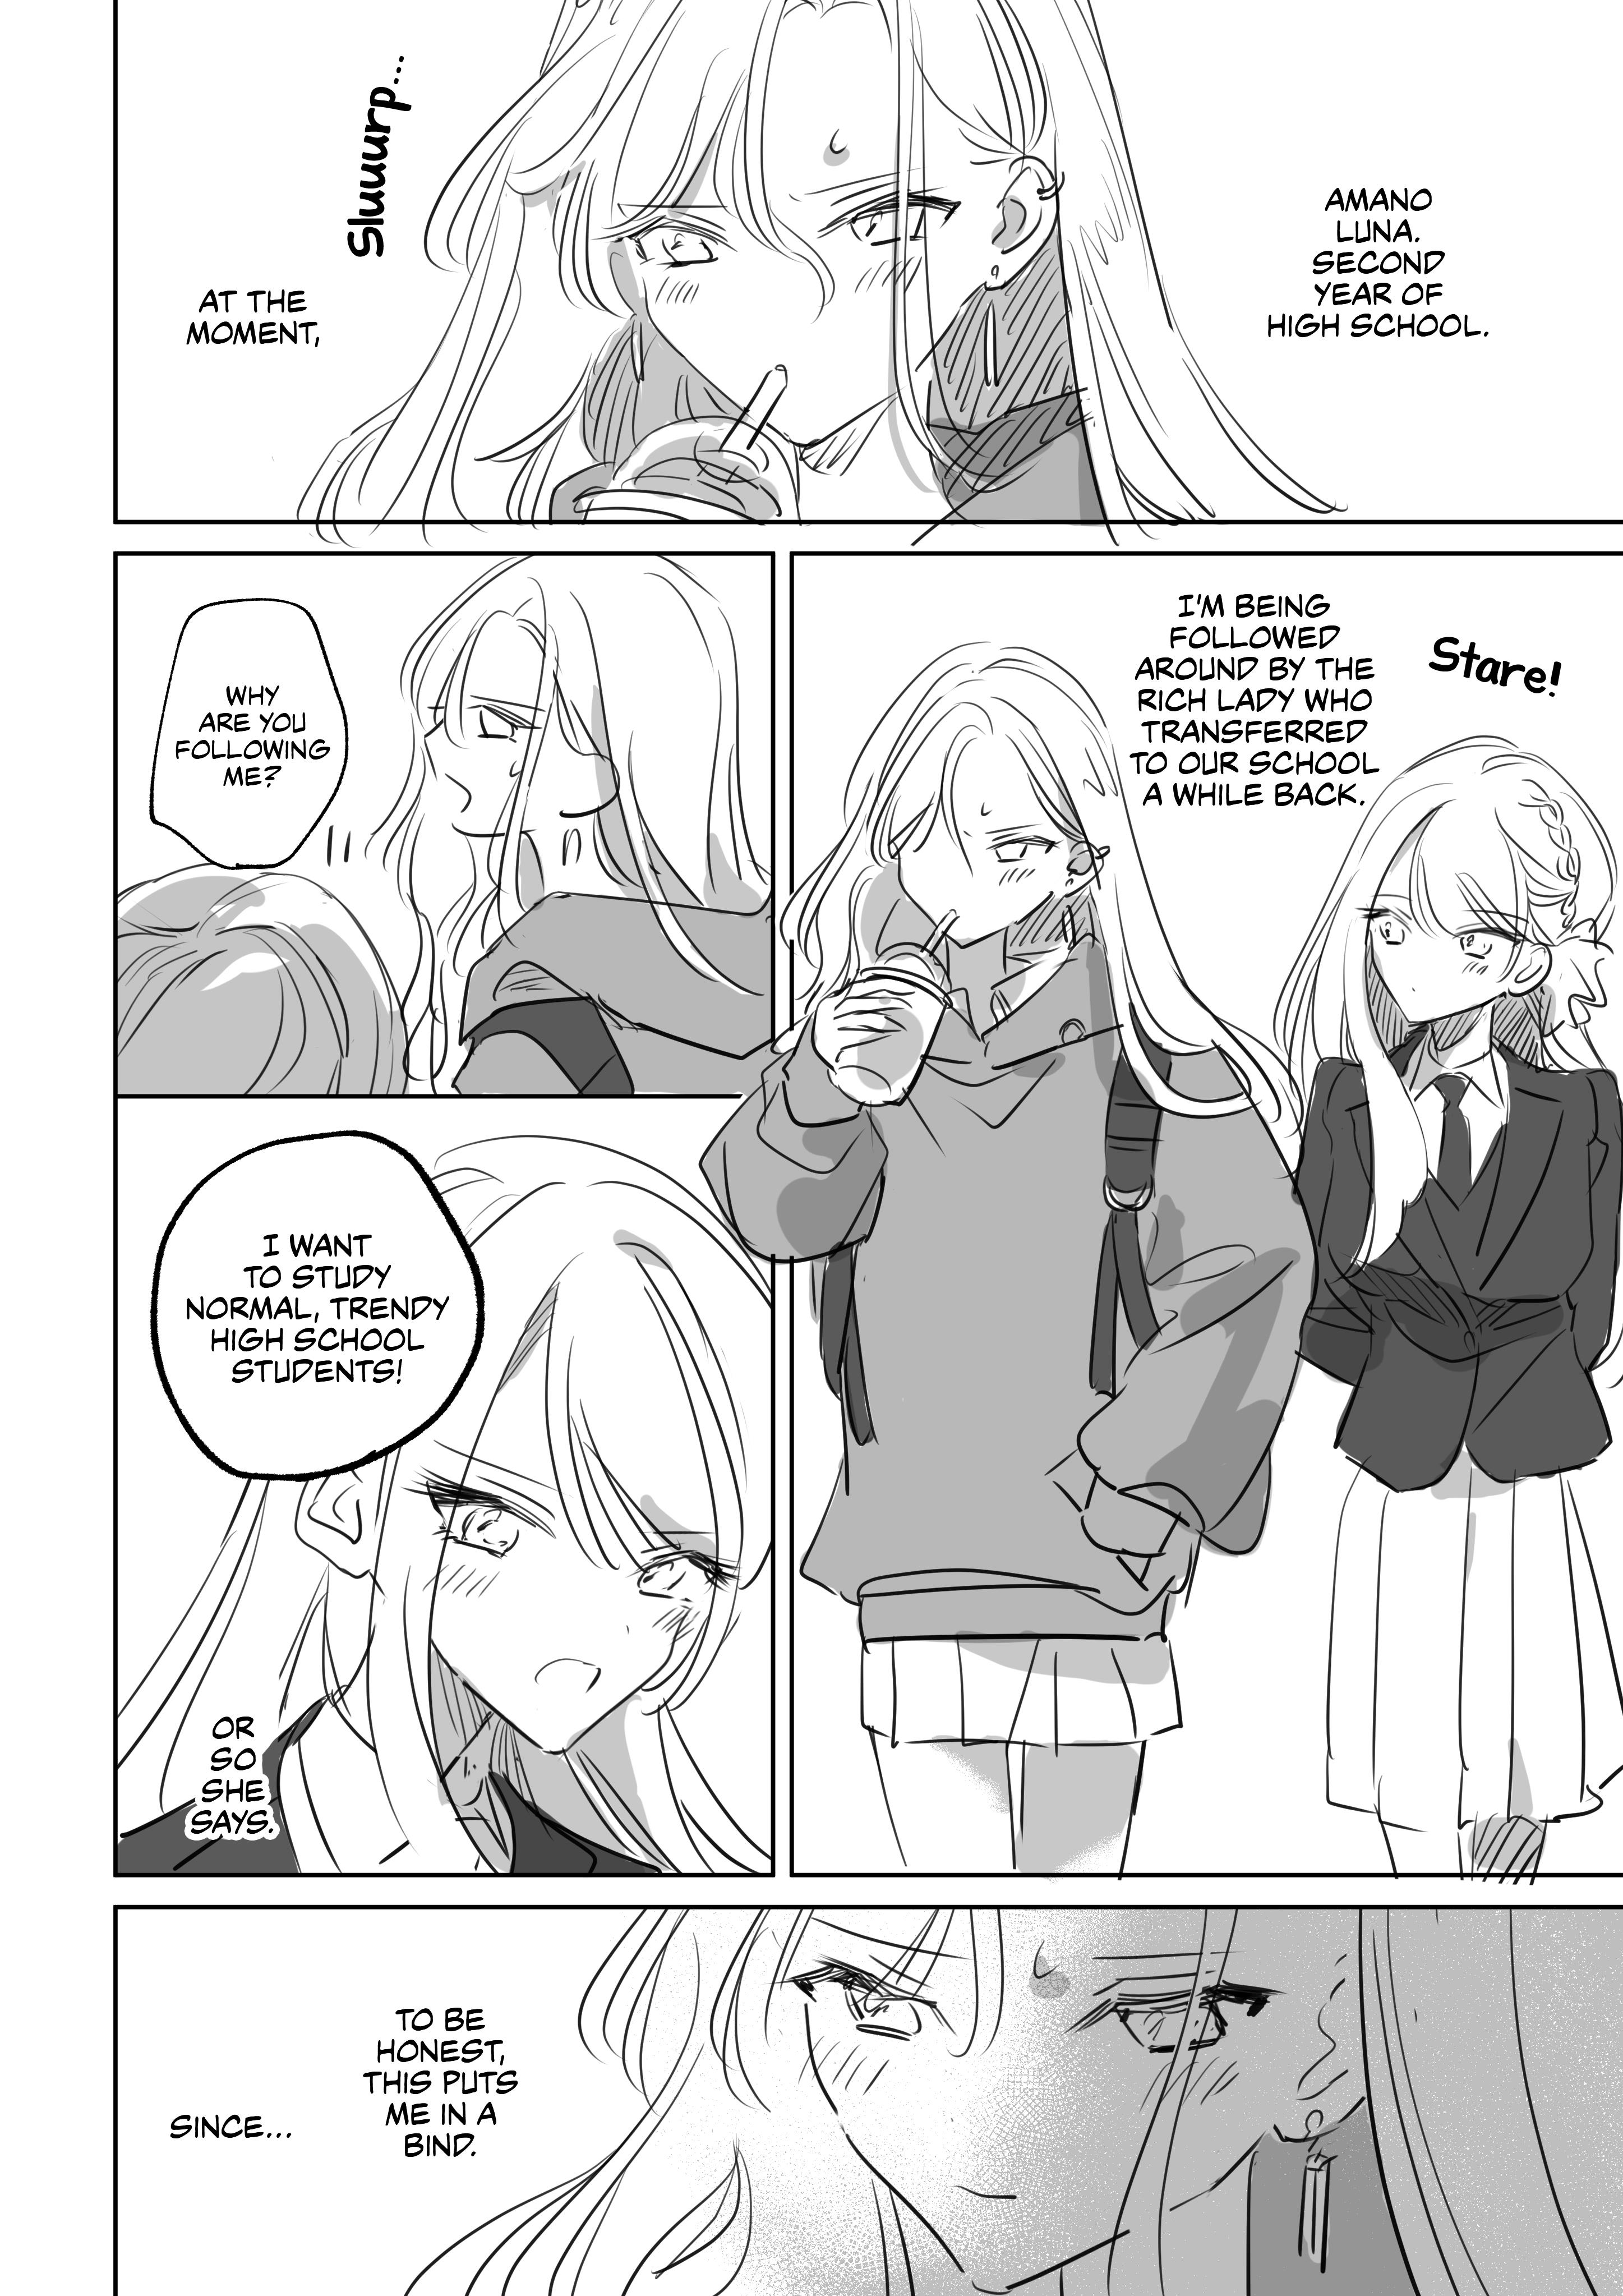 Gal And Young Lady - Page 1